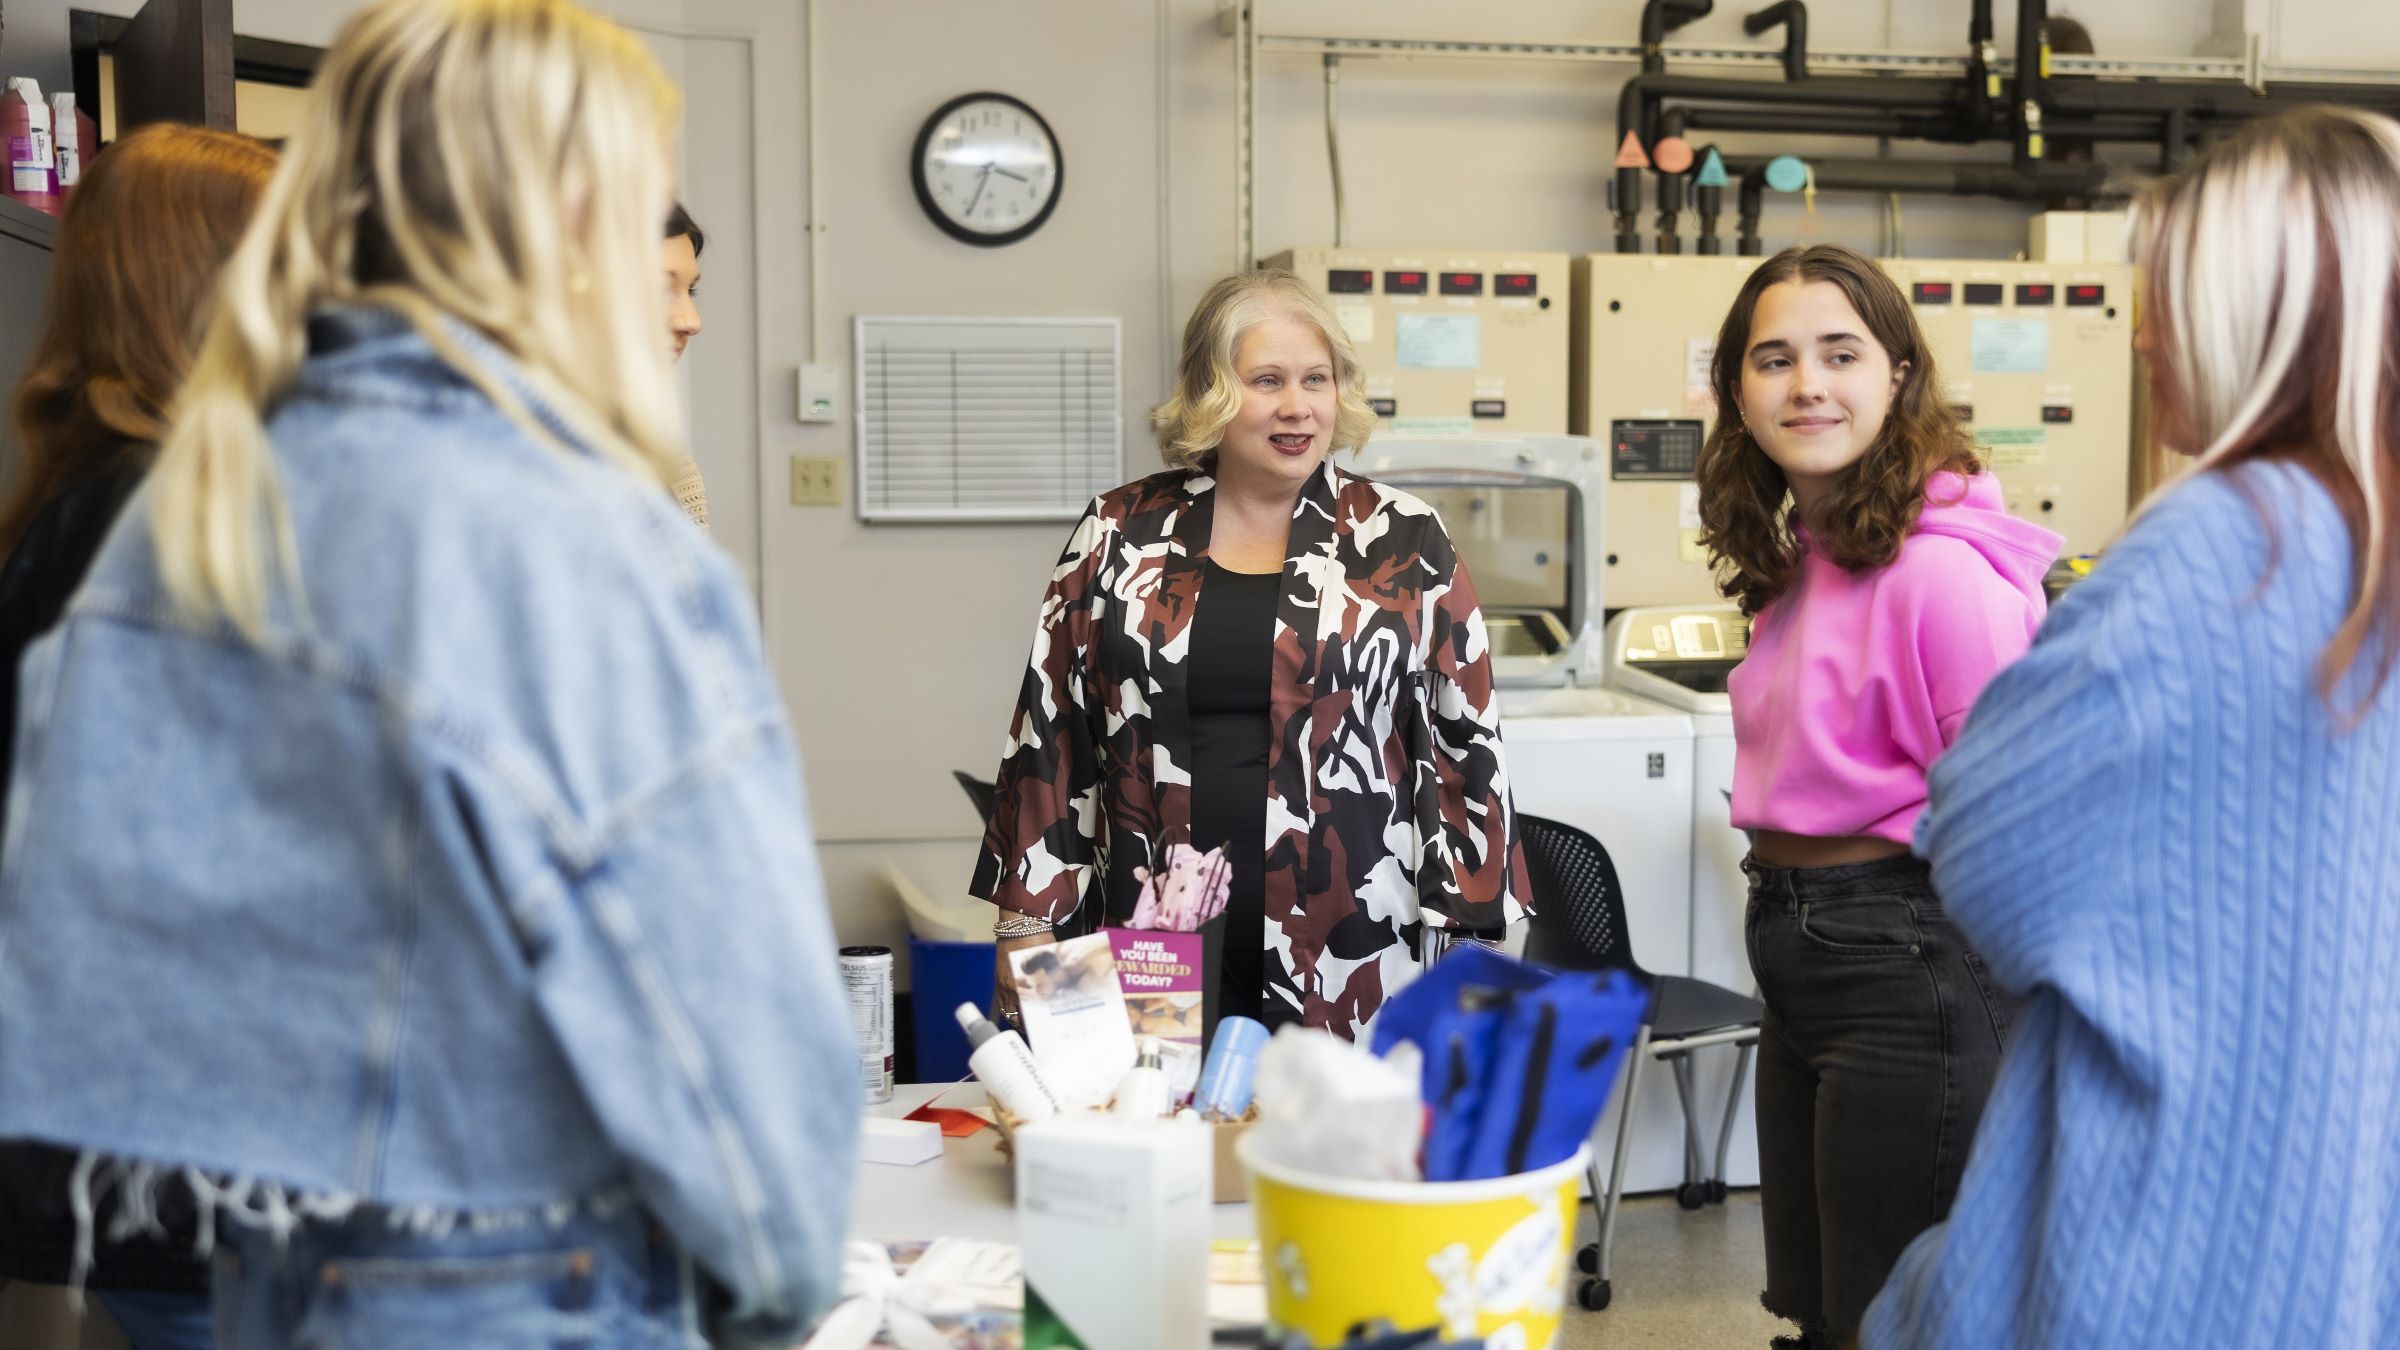 Scarlett Wesley, UK course instructor and associate professor in the Department of Retail and Tourism Management, helps her students in the MAT 559: Fashion Show Production course coordinate and run this event each spring. Photo by Sabrina Hounshell.